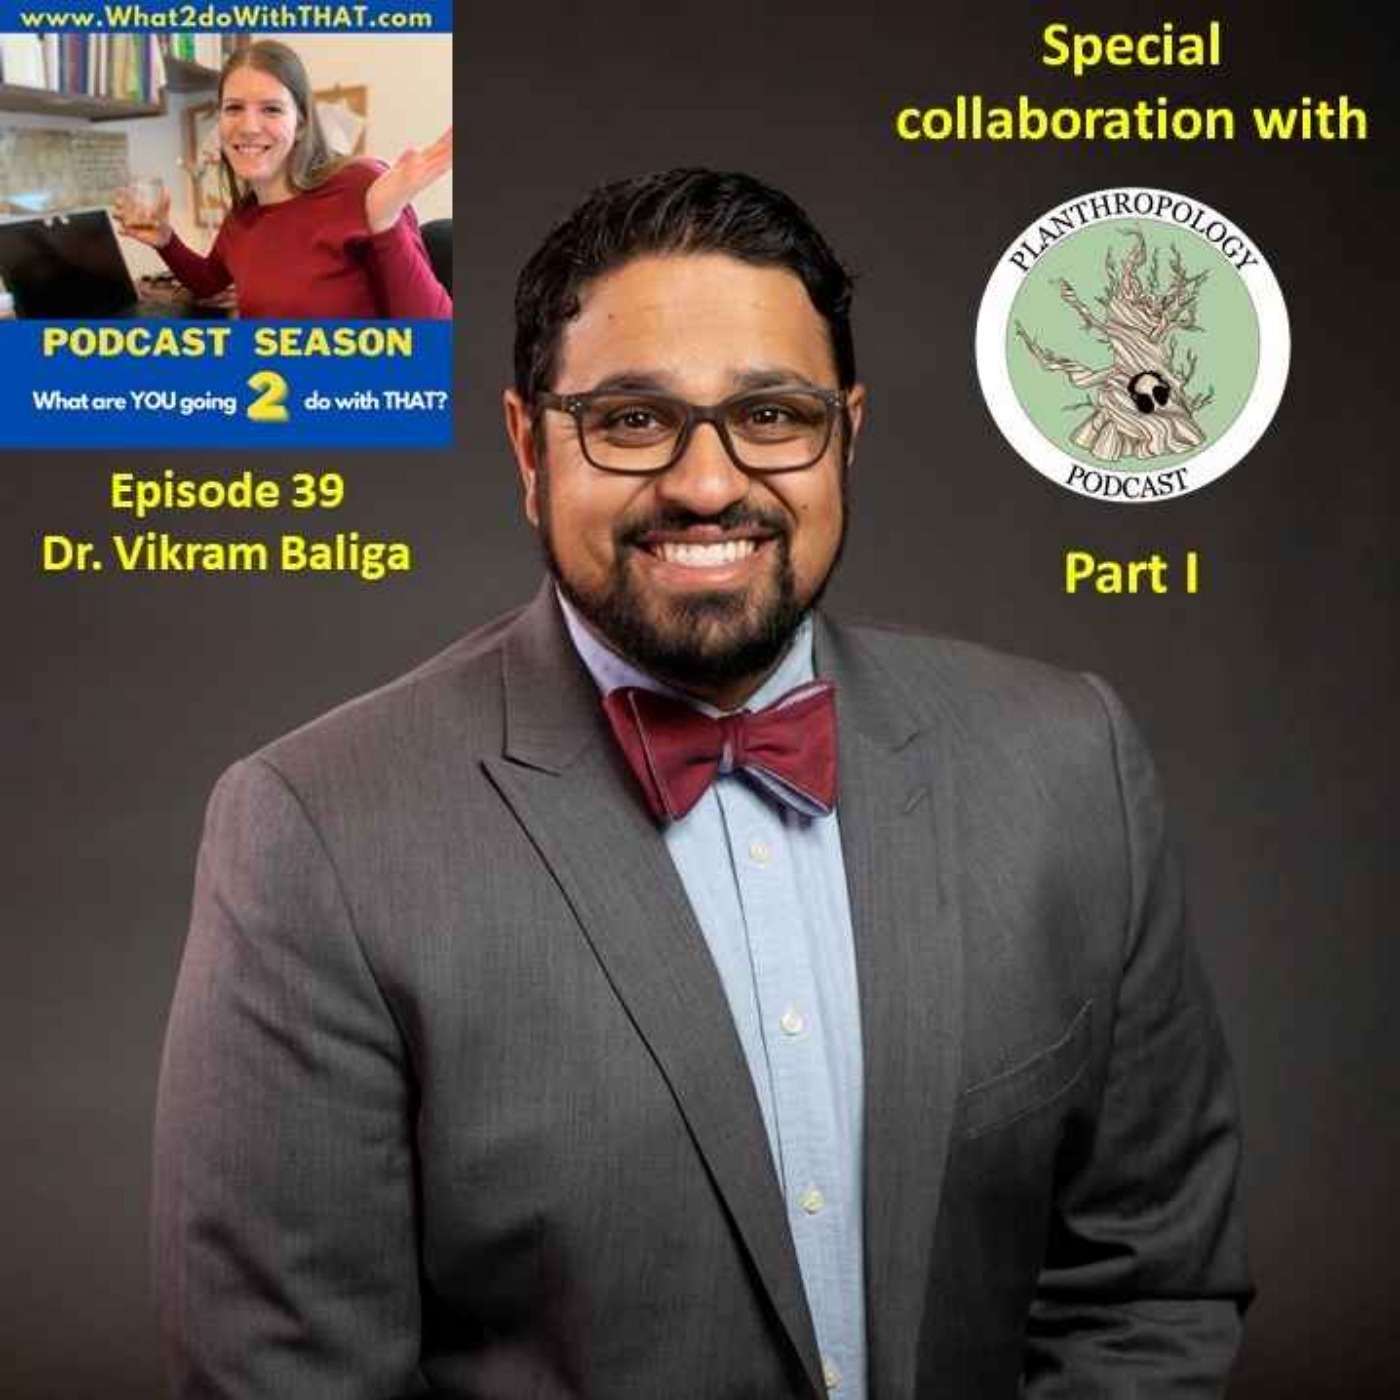 Episode 39 - Special collaboration with Planthropology (Dr. Vikram Baliga)